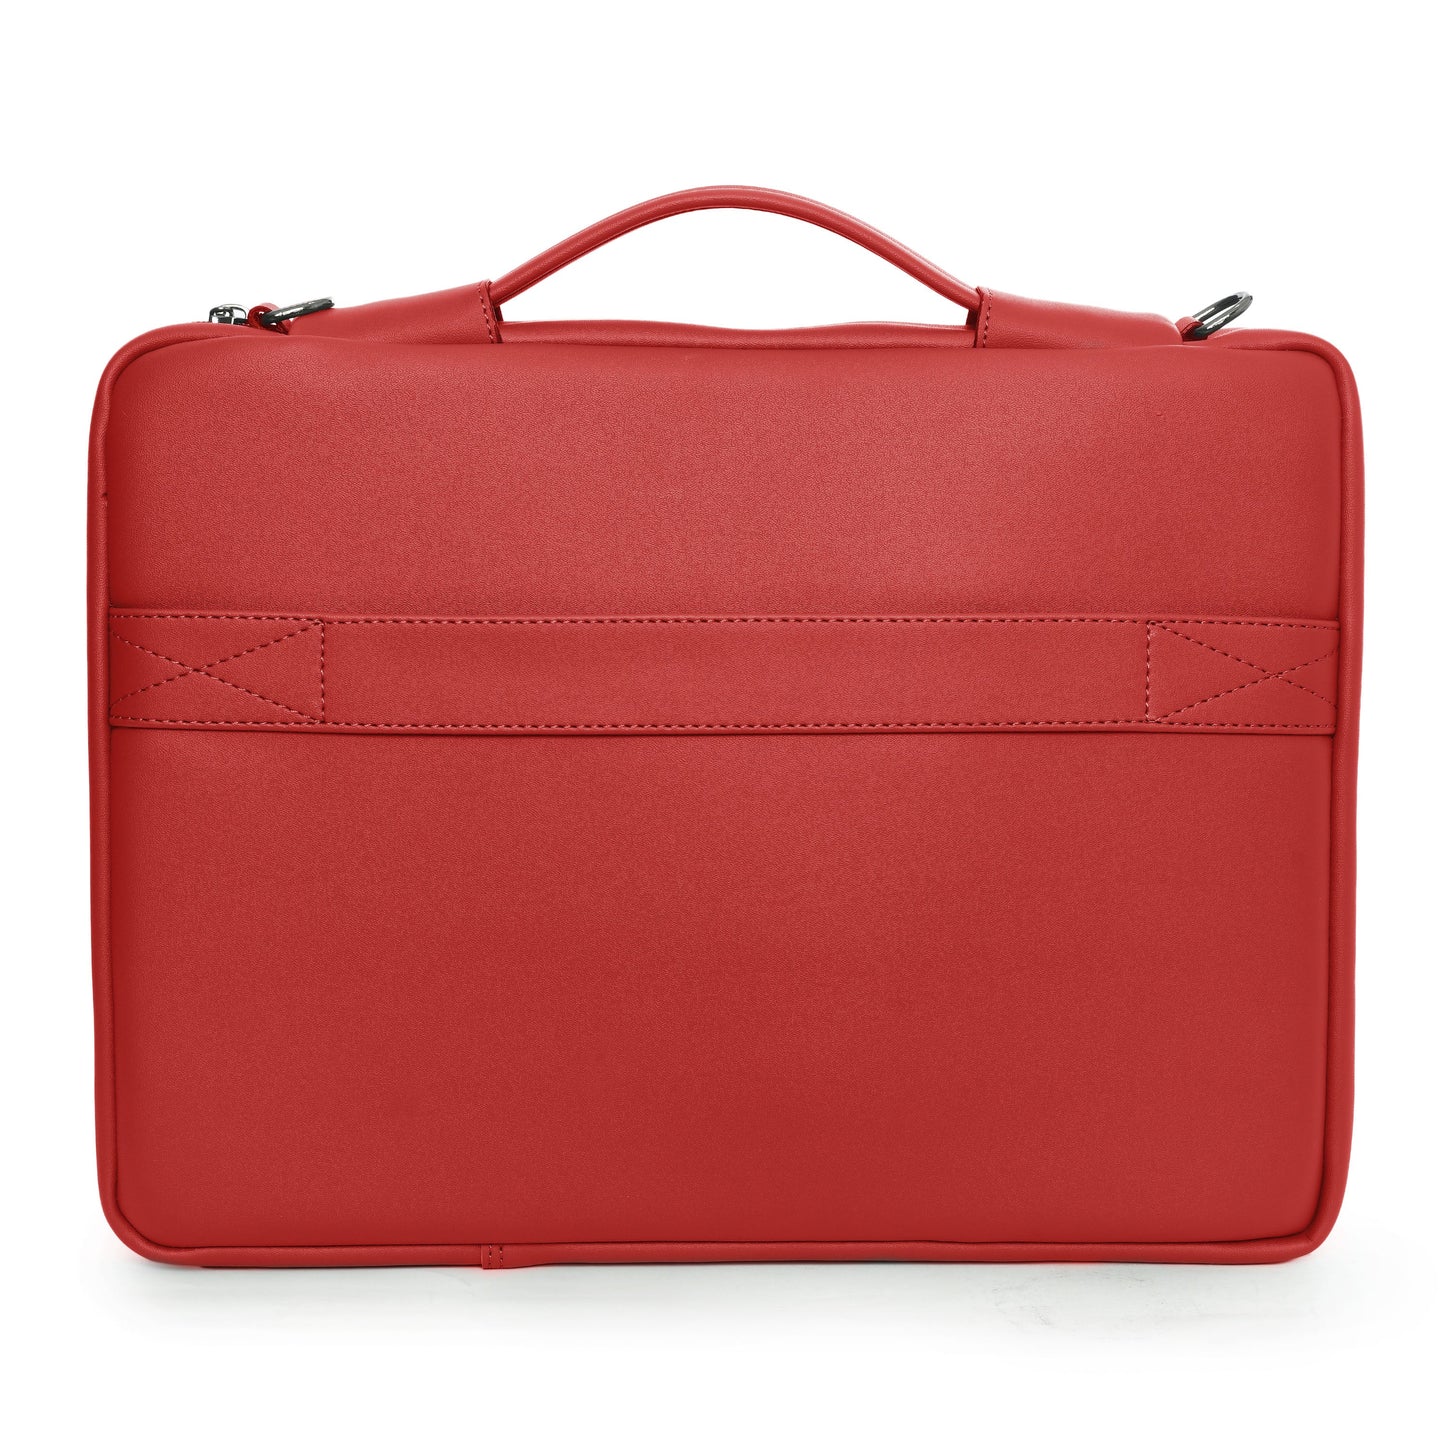 vaku-luxos®-da-valencia-mestella-series-for-macbook-14-refined-leather-sleeve-with-strap-highly-durable-red8905129019716